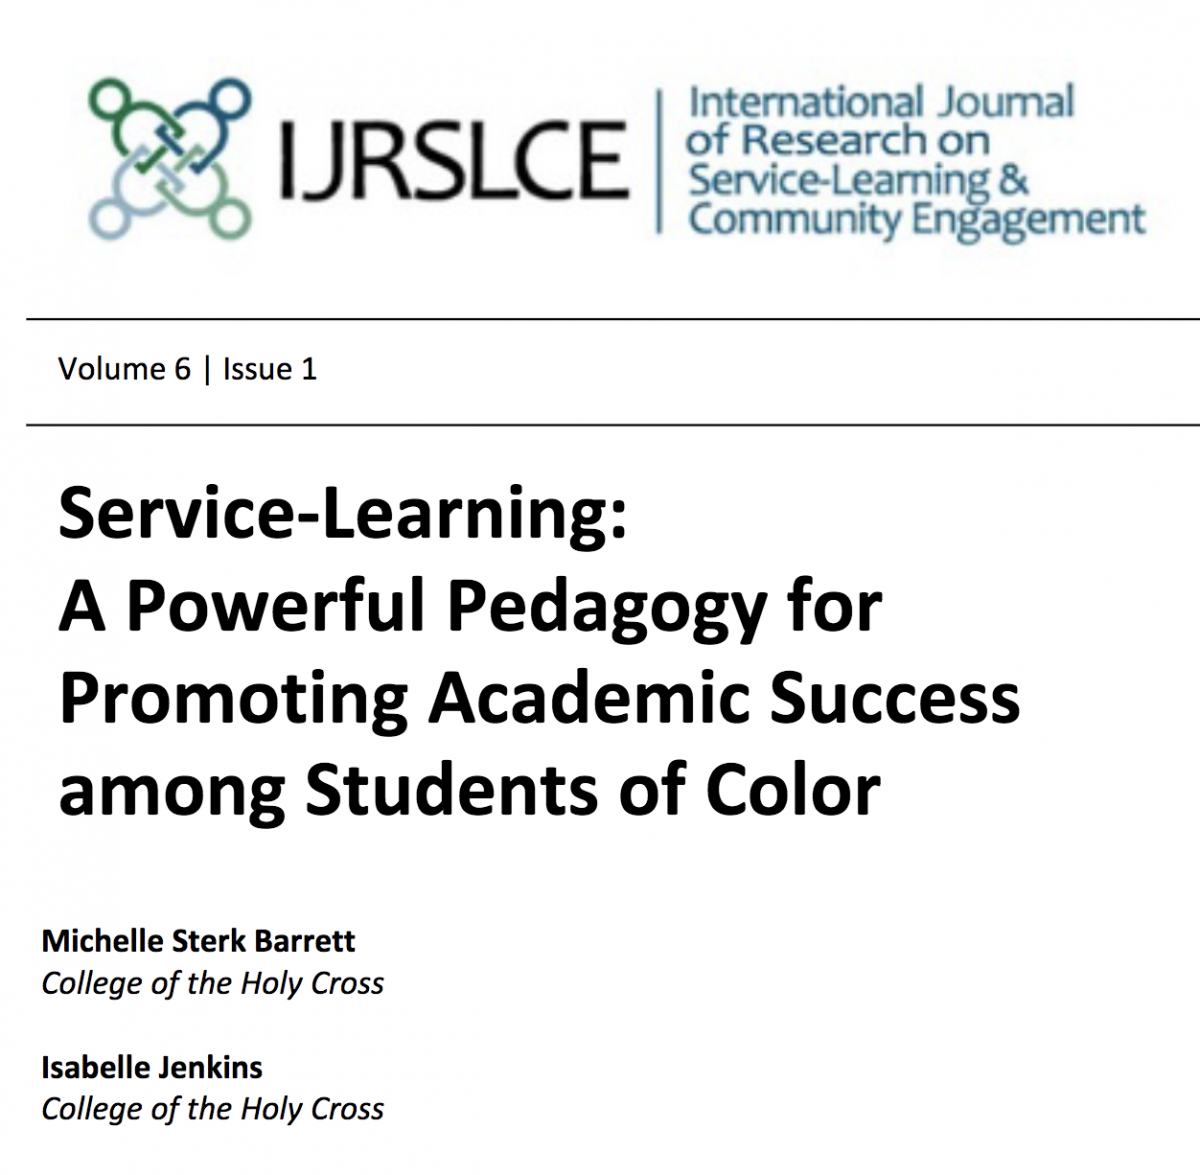 Picture of the journal article, "Service-Learning: A Powerful Pedagogy for Promoting Academic Success among Students of Color"